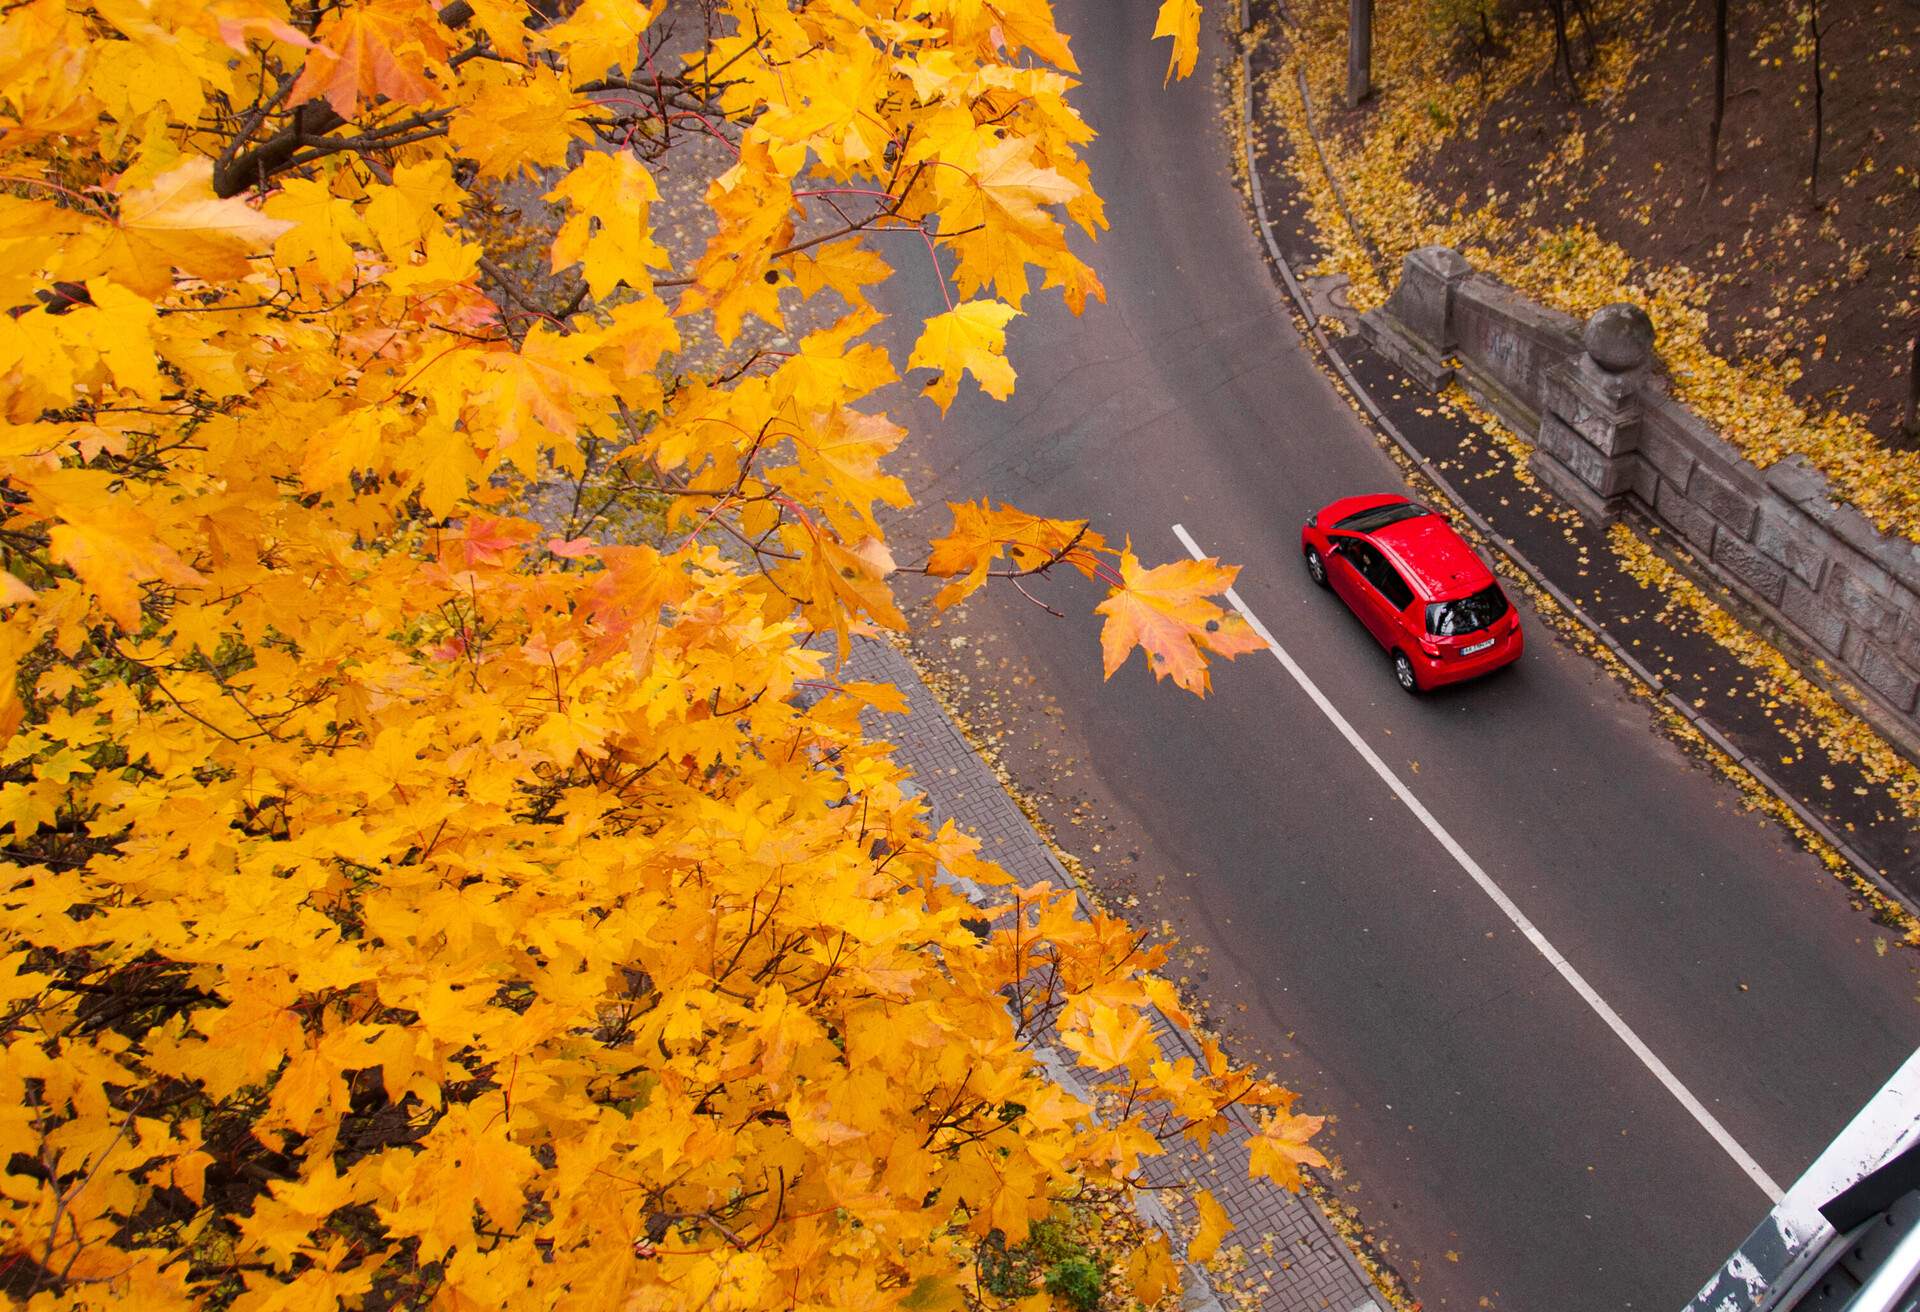 Maple trees and fallen yellow leaves are on the side of a road, while a red car passes by.